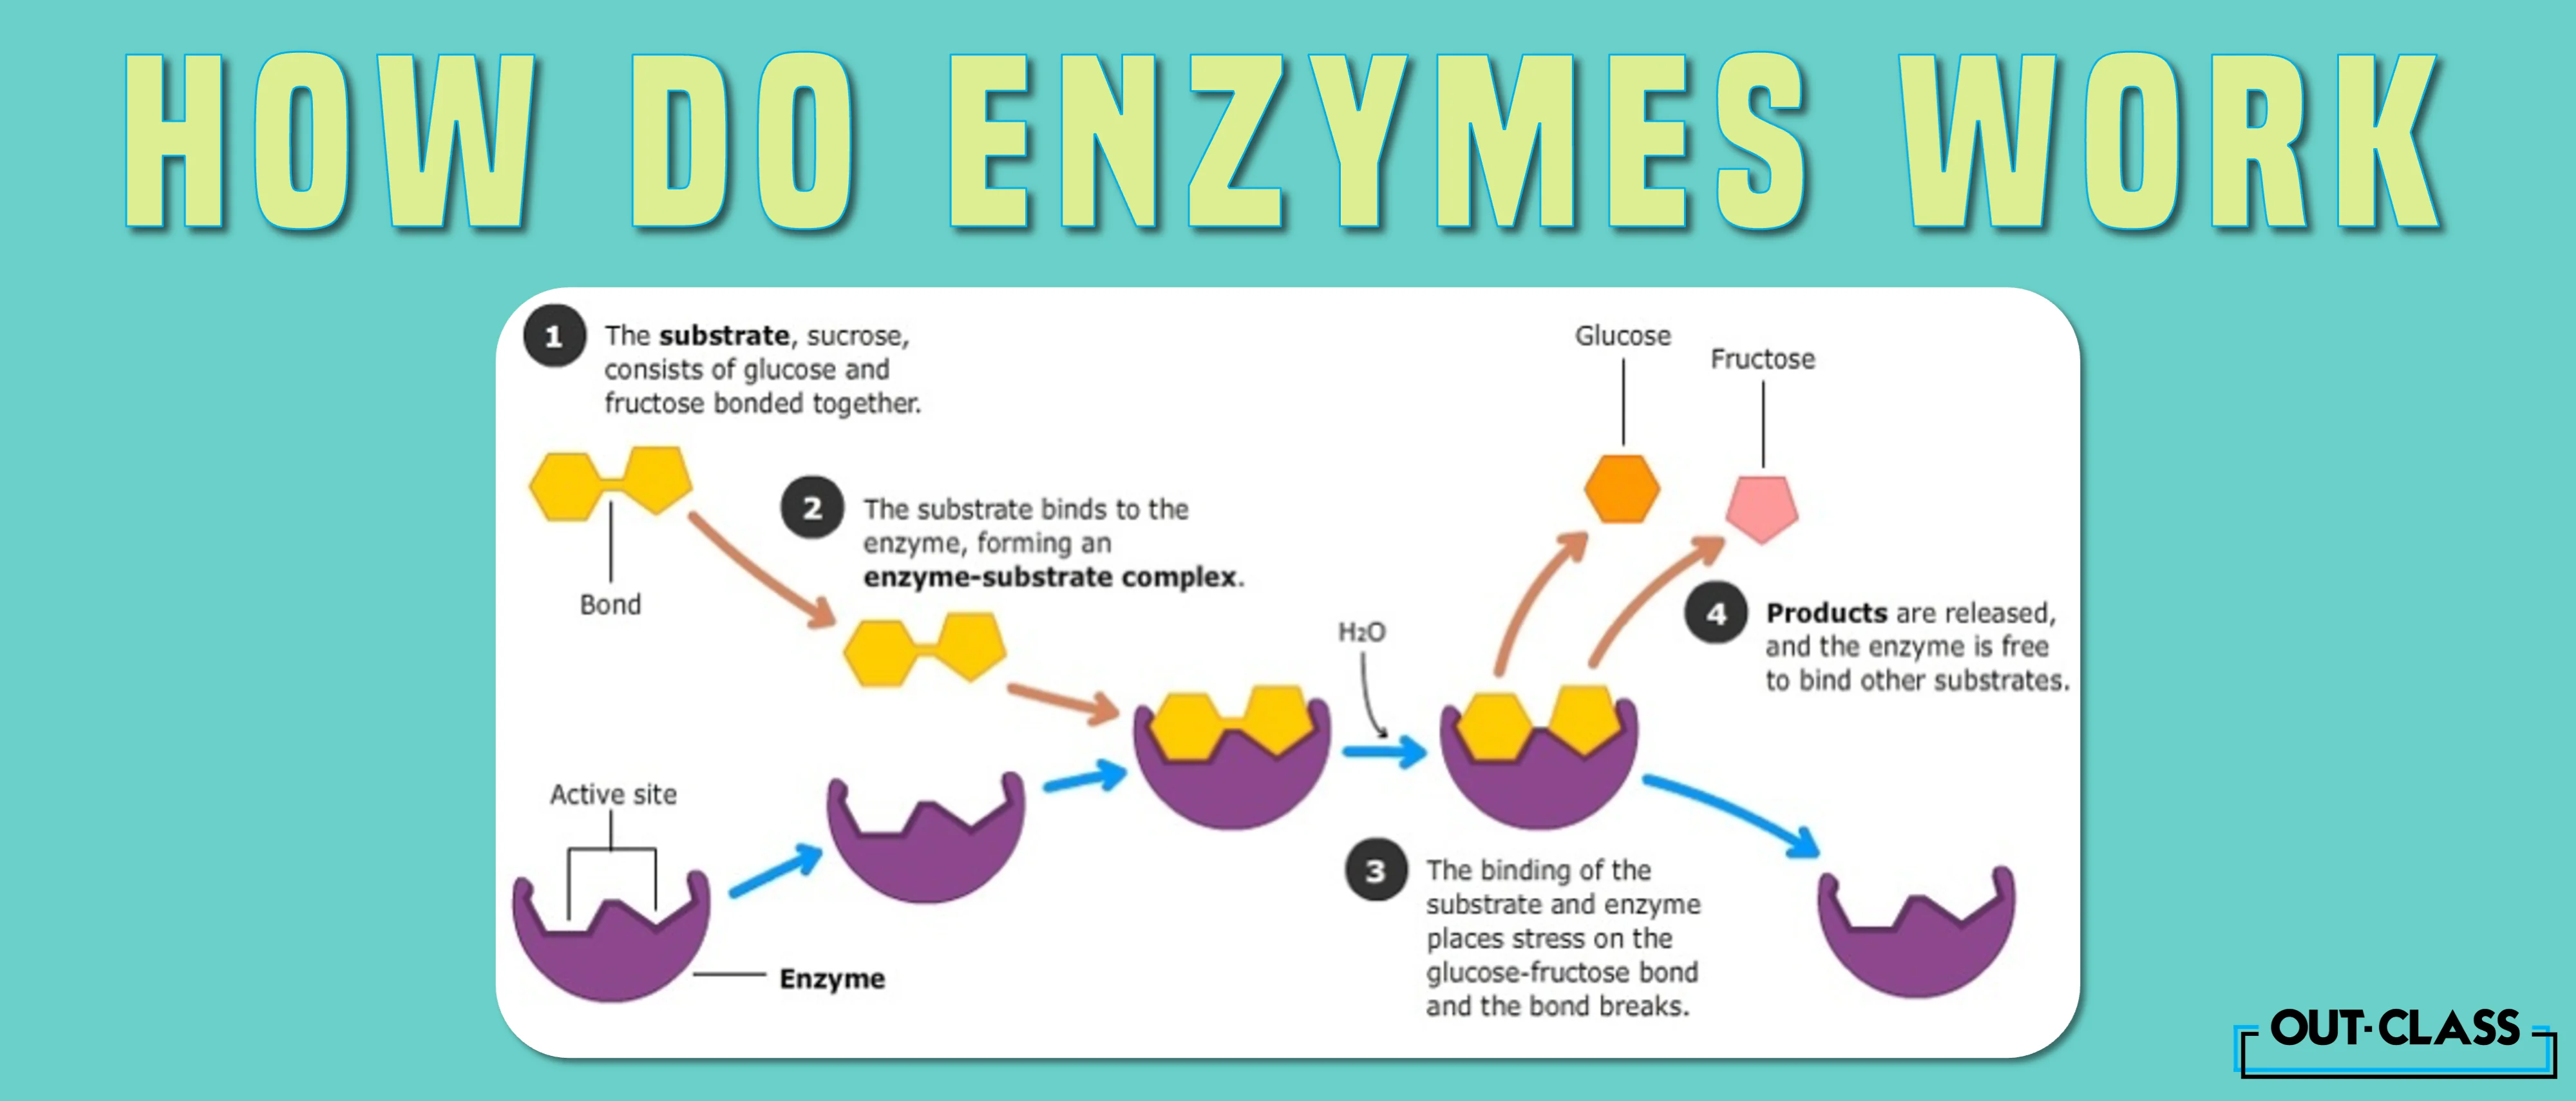 it shows how enzymes work along with the lock and key as an example.